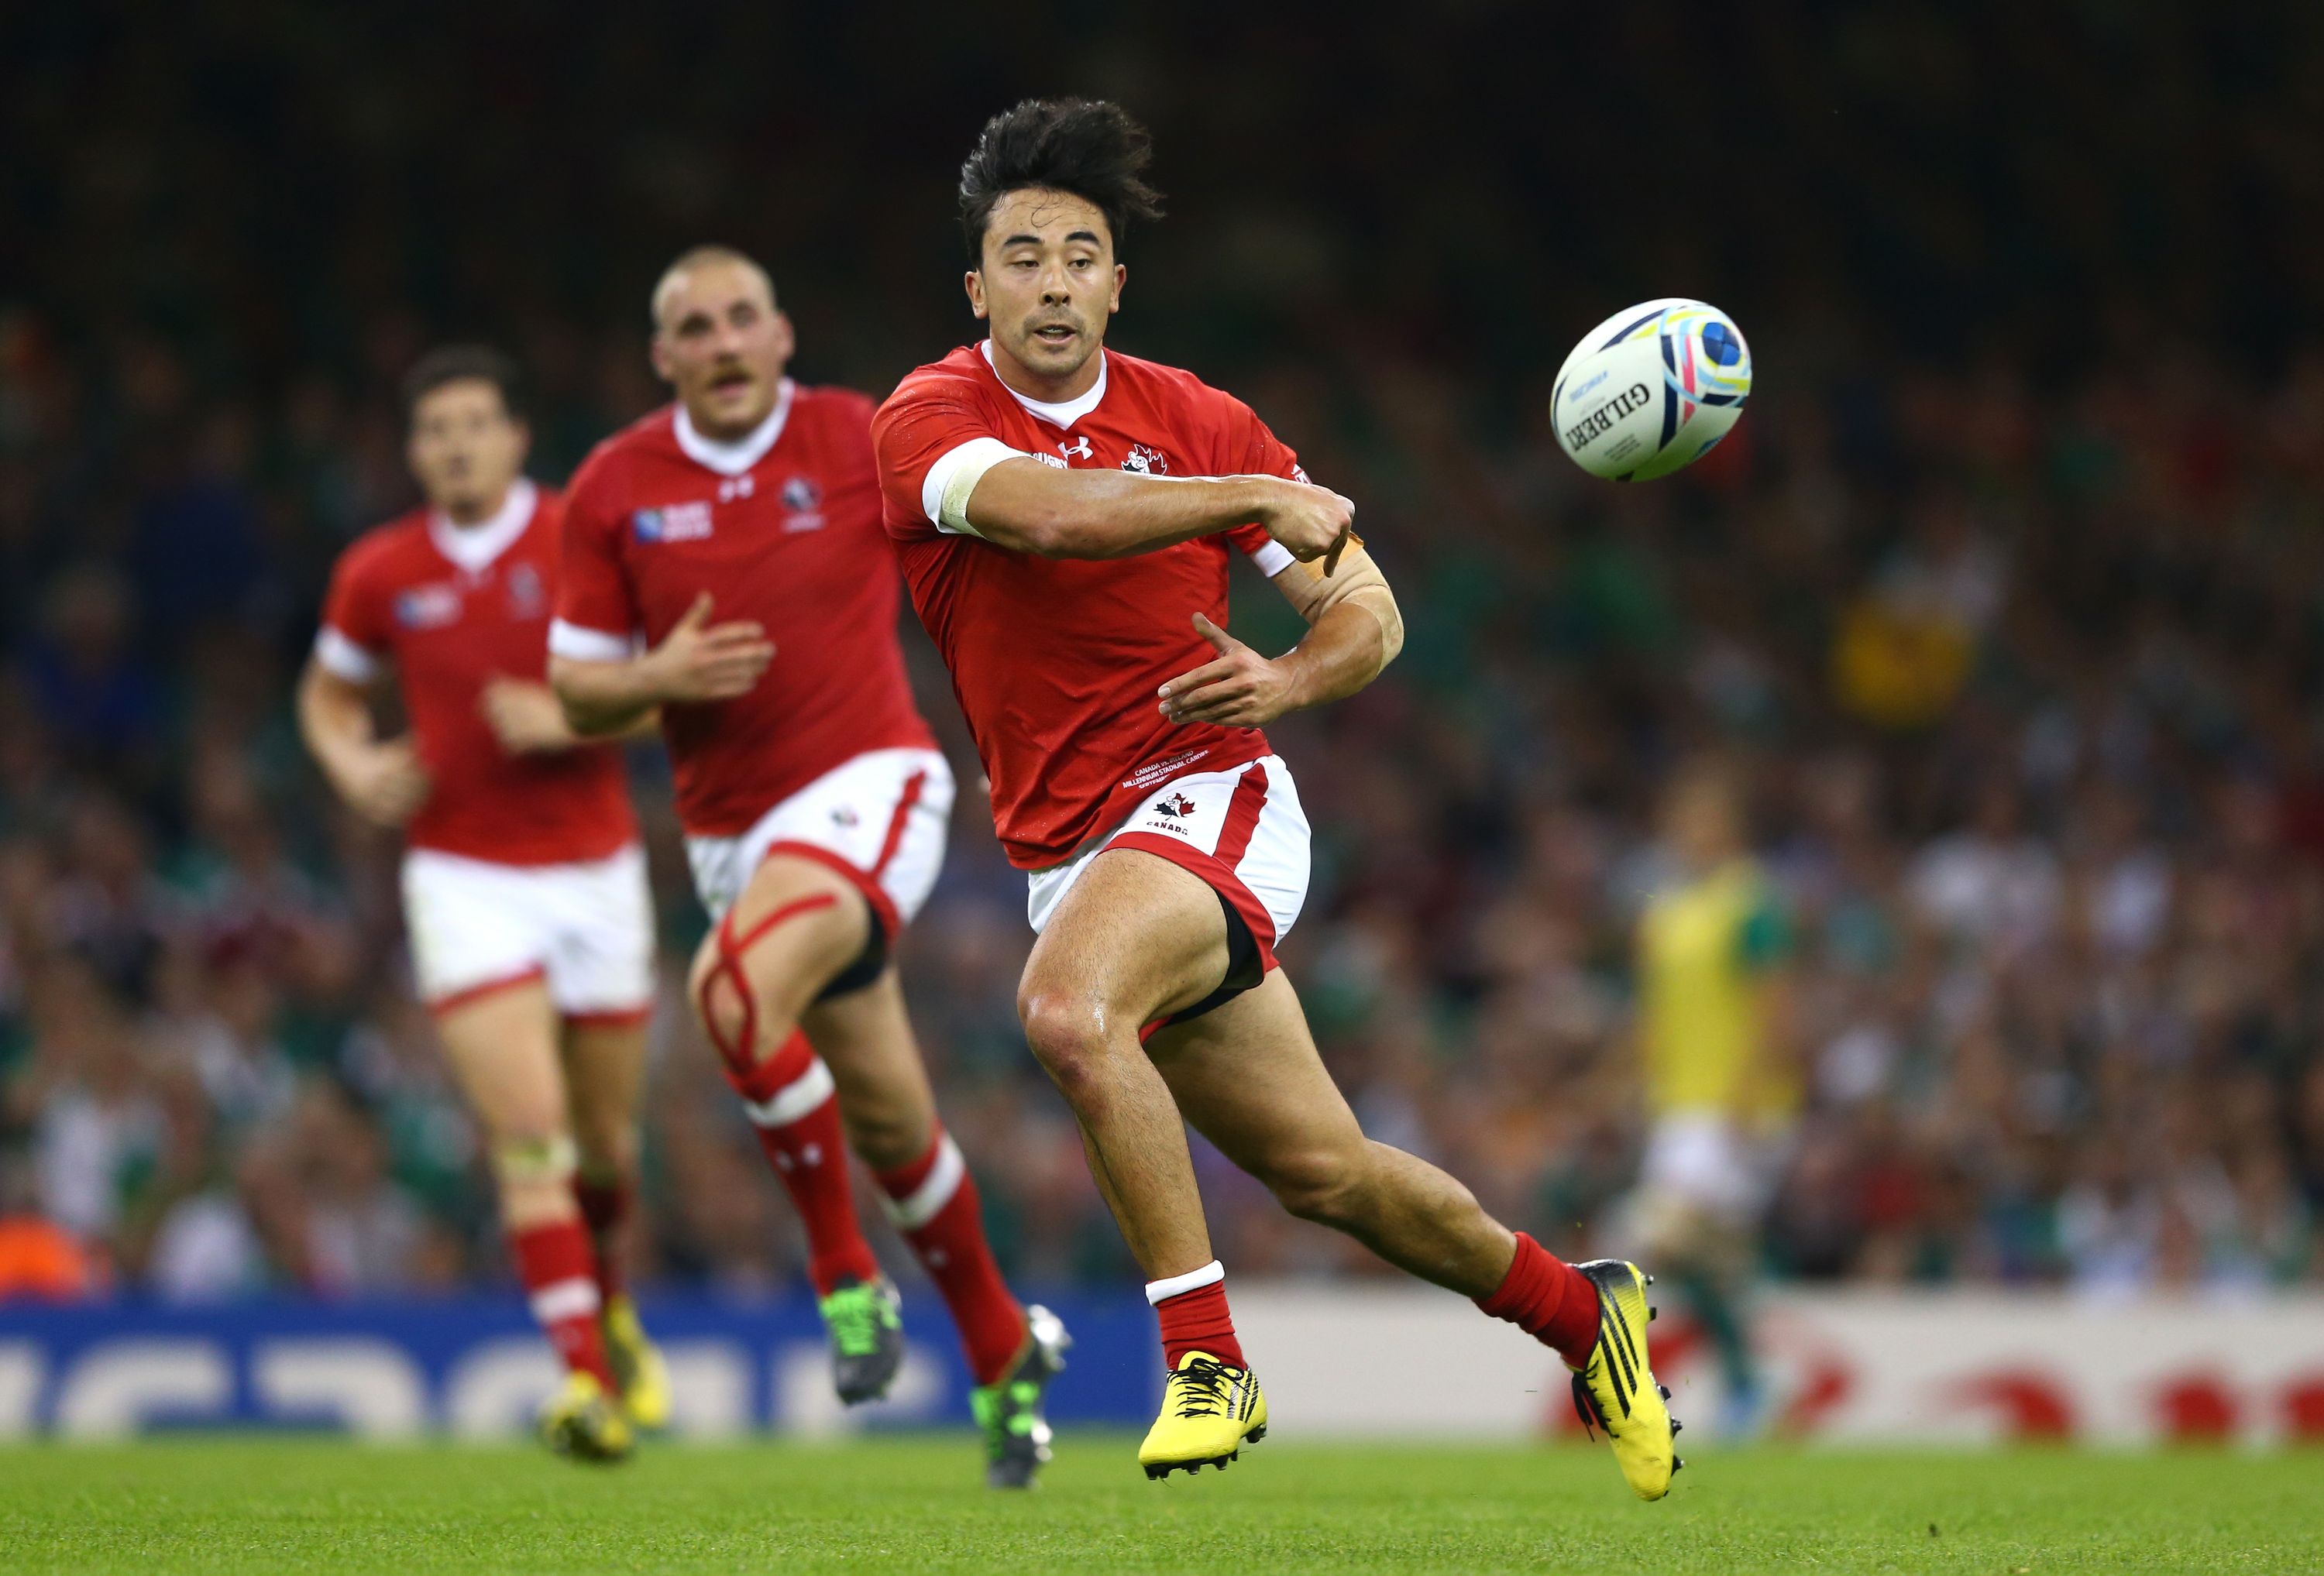 CARDIFF, WALES - SEPTEMBER 19:  Nathan Hirayama of Canada passes during the 2015 Rugby World Cup Pool D match between Ireland and Canada at the Millennium Stadium on September 19, 2015 in Cardiff, United Kingdom.  (Photo by Michael Steele/Getty Images)